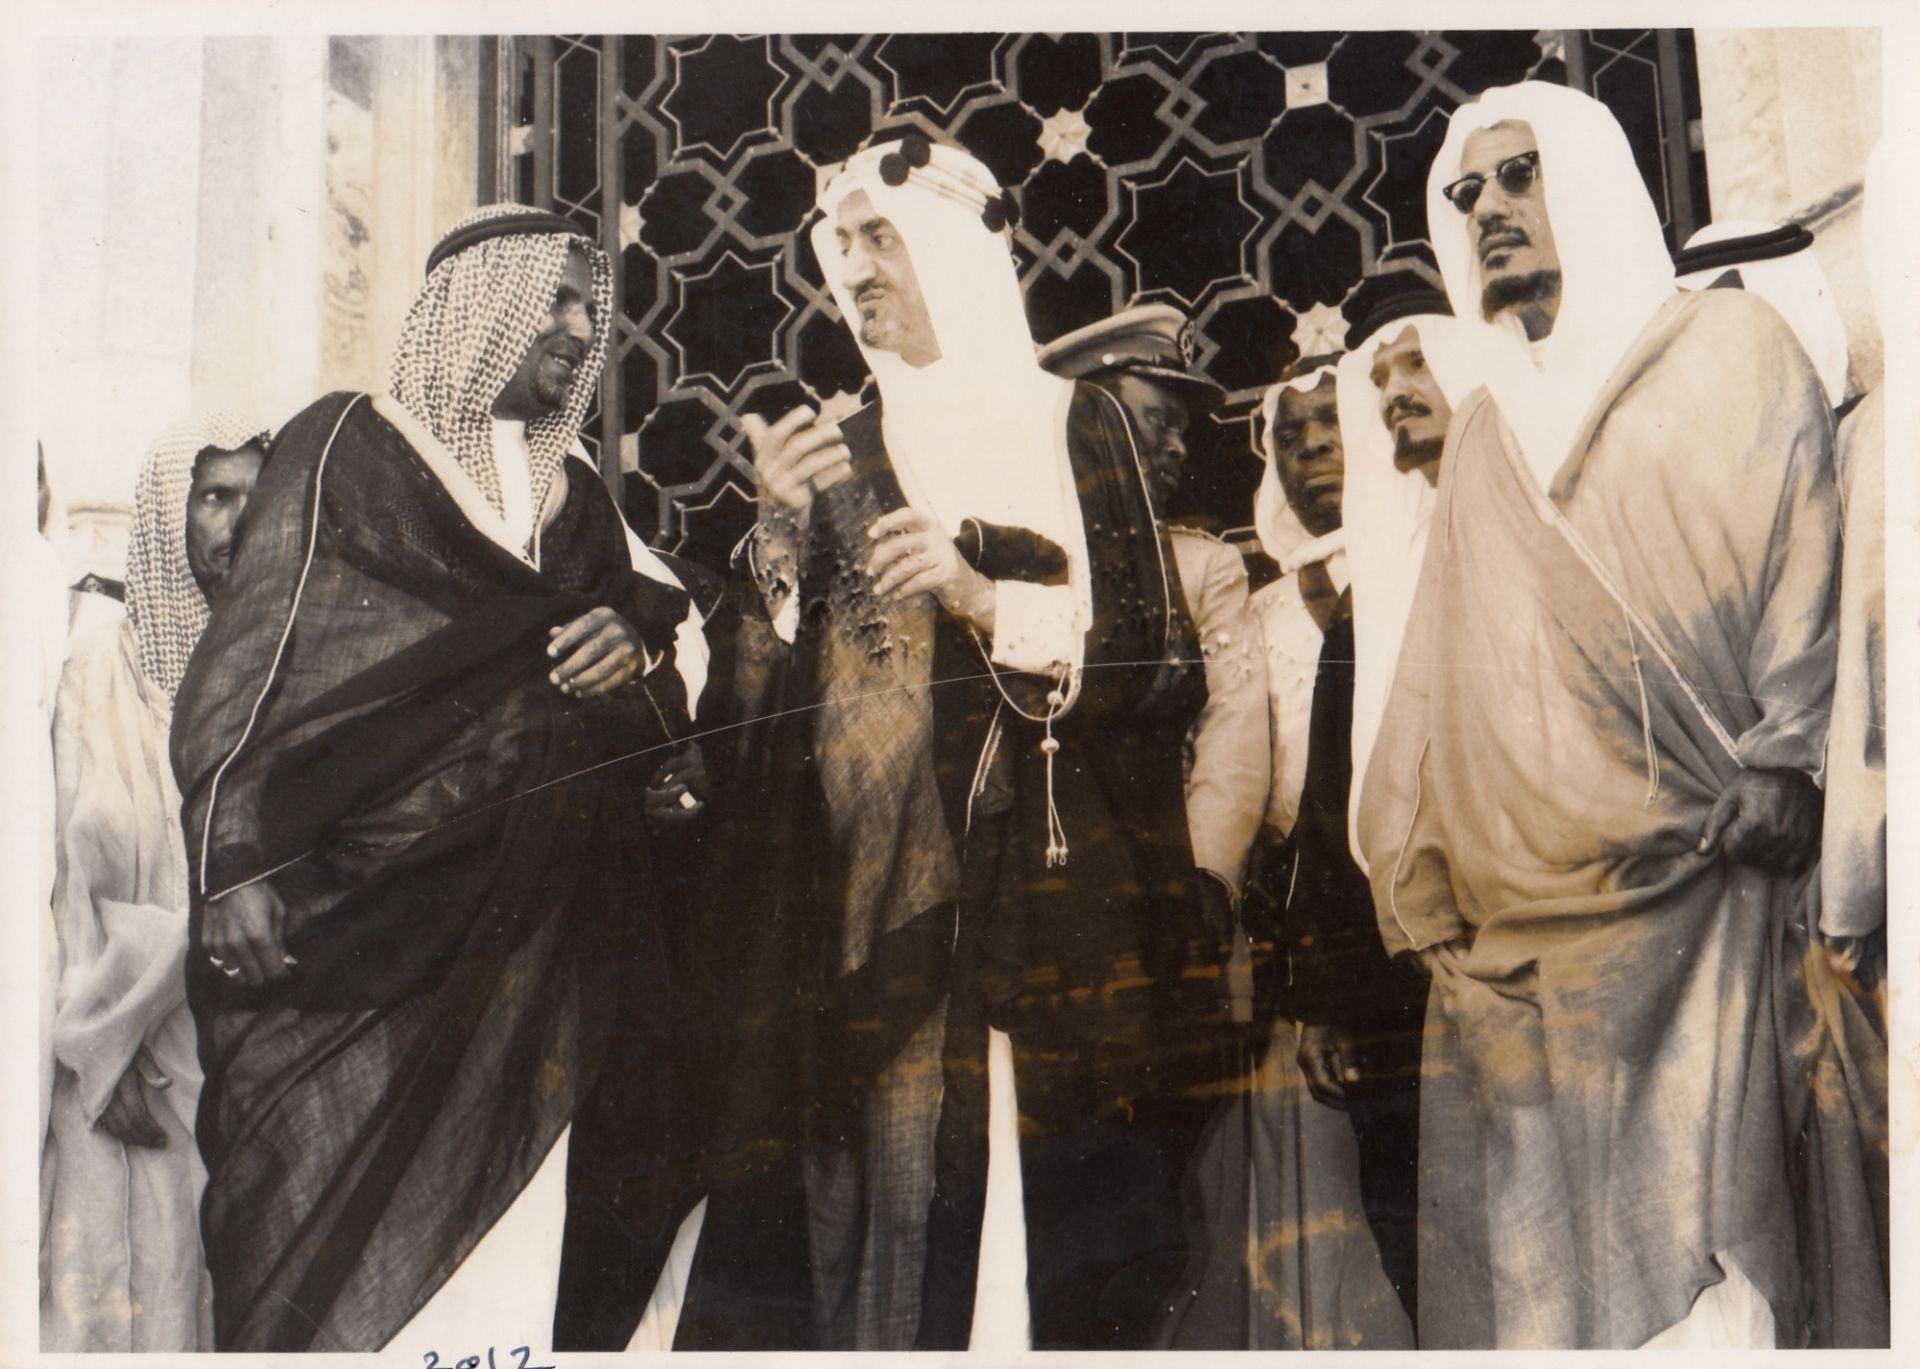 A COLLECTION OF PHOTOGRAPHS OF HIS MAJESTY KING FAISAL BIN ABDUL AZIZ VISITING THE GRAND MOSQUES OF - Image 16 of 24